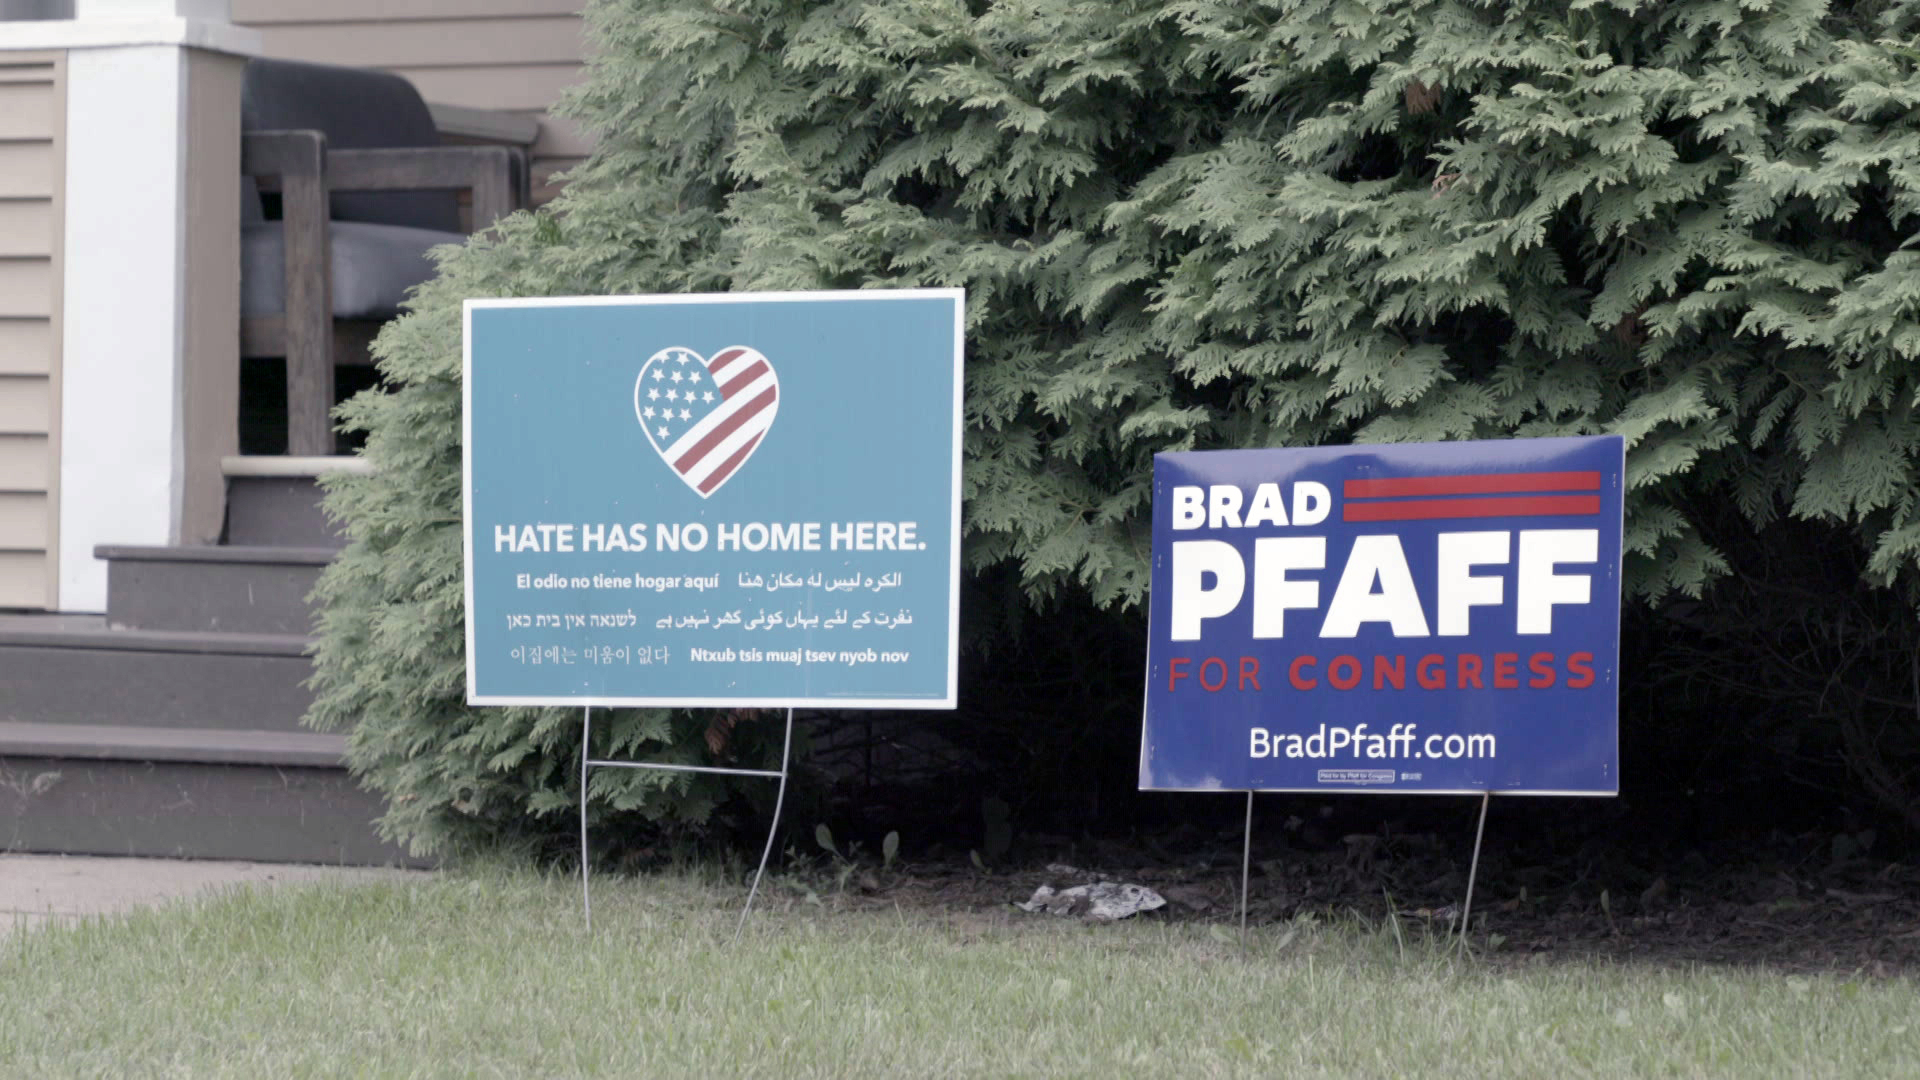 Two yard signs are placed in a lawn in front of a tree and stairs leading to a patio — one reads "Hate Has No Home Here" under a U.S. flag superimposed on a heart symbol, and another reads "Brad Pfaff for Congress."